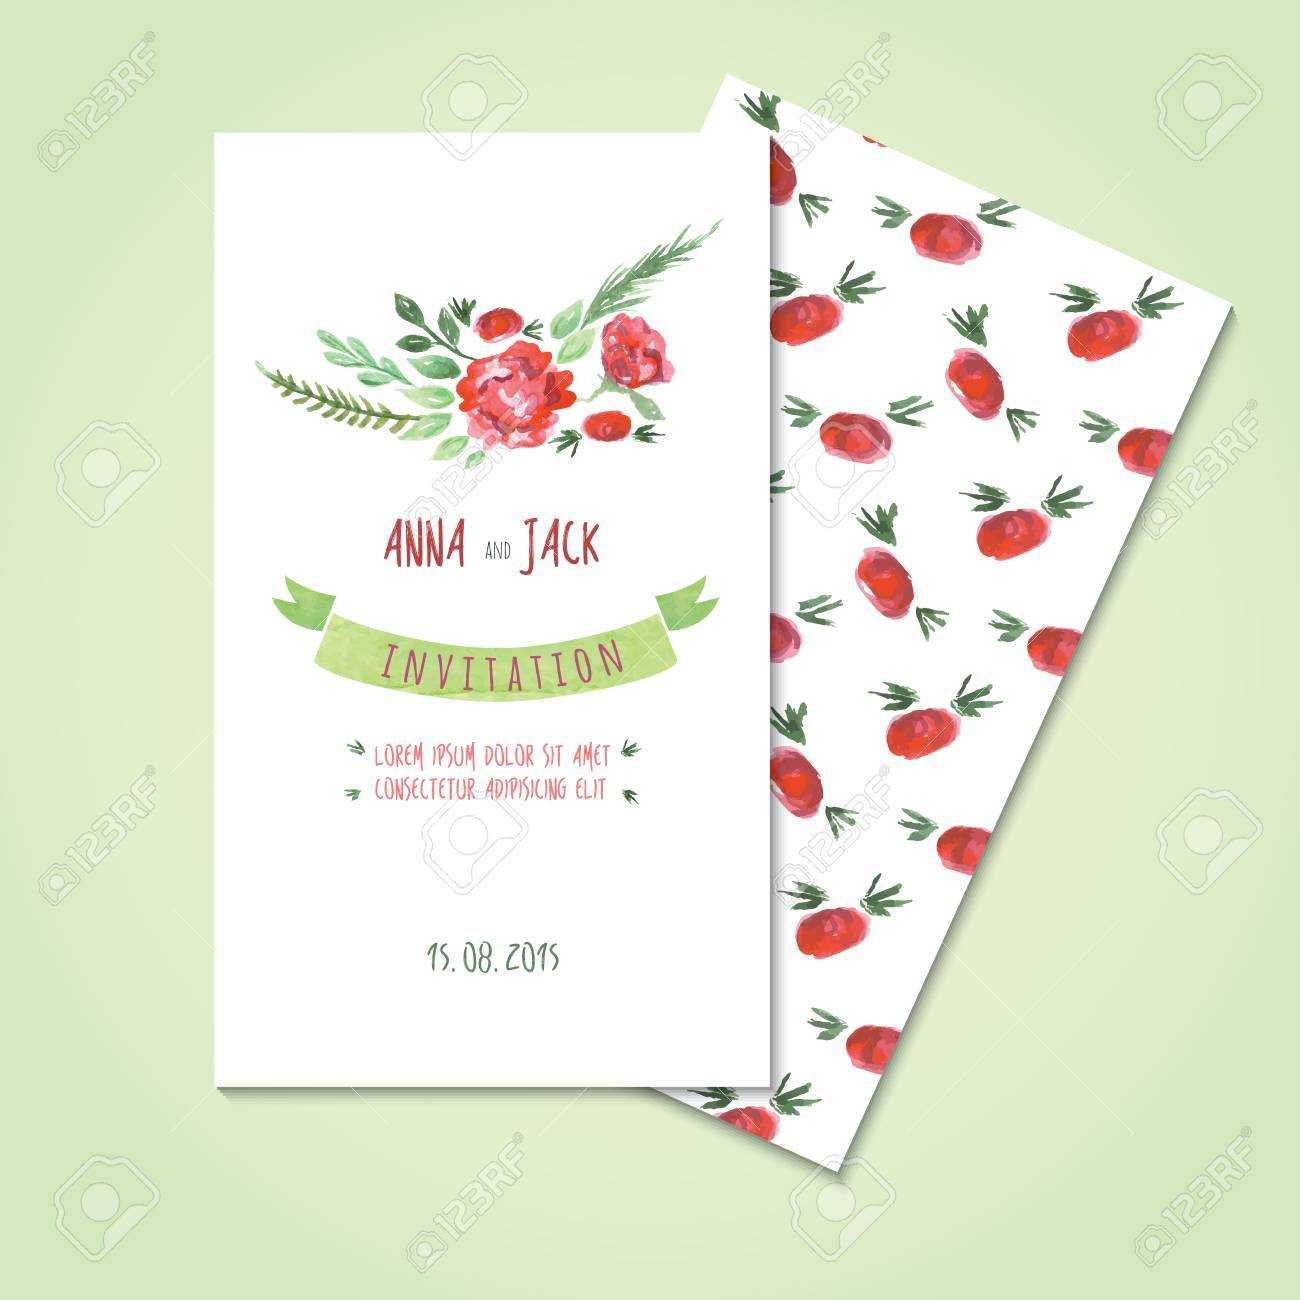 Watercolor Card Templates For Wedding Invitation Save The Date.. Within Save The Date Cards Templates